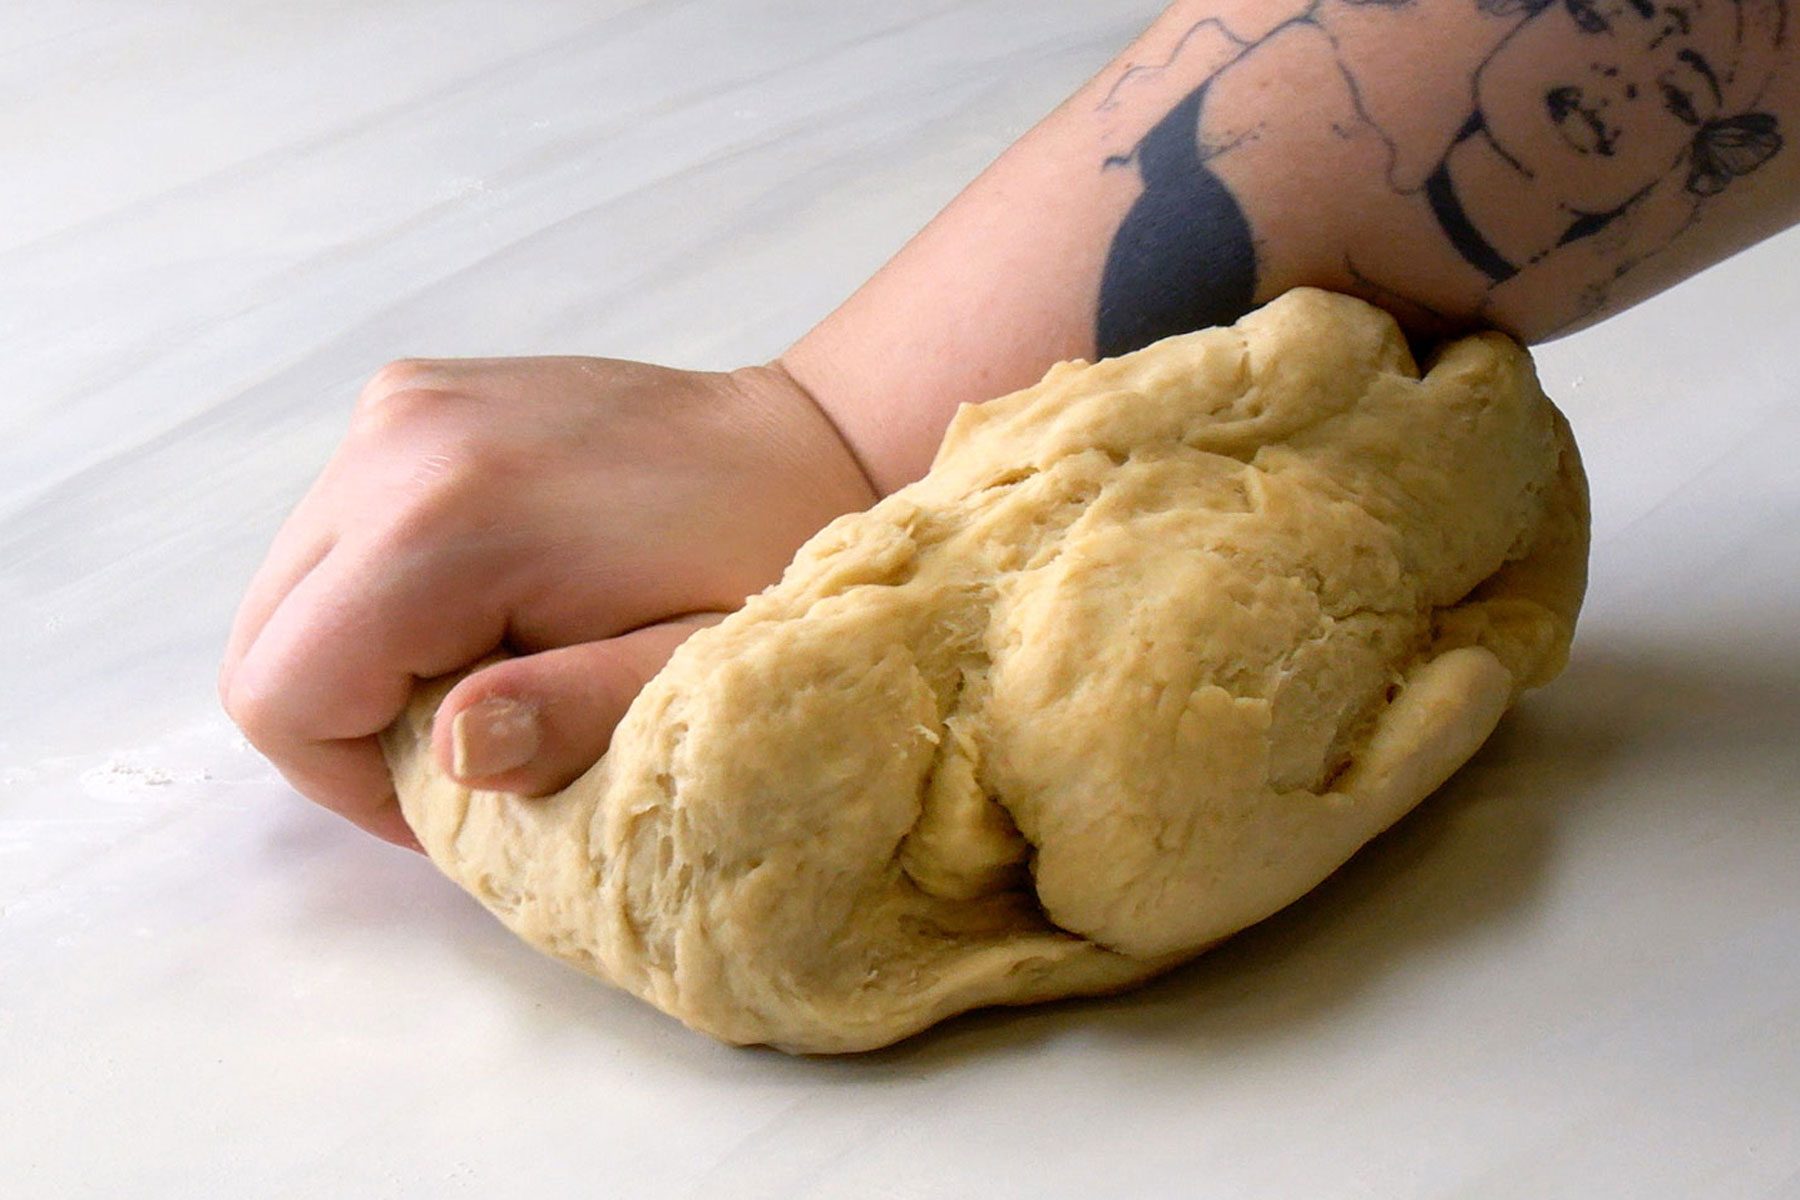 A person Kneading the dough on a marble surface